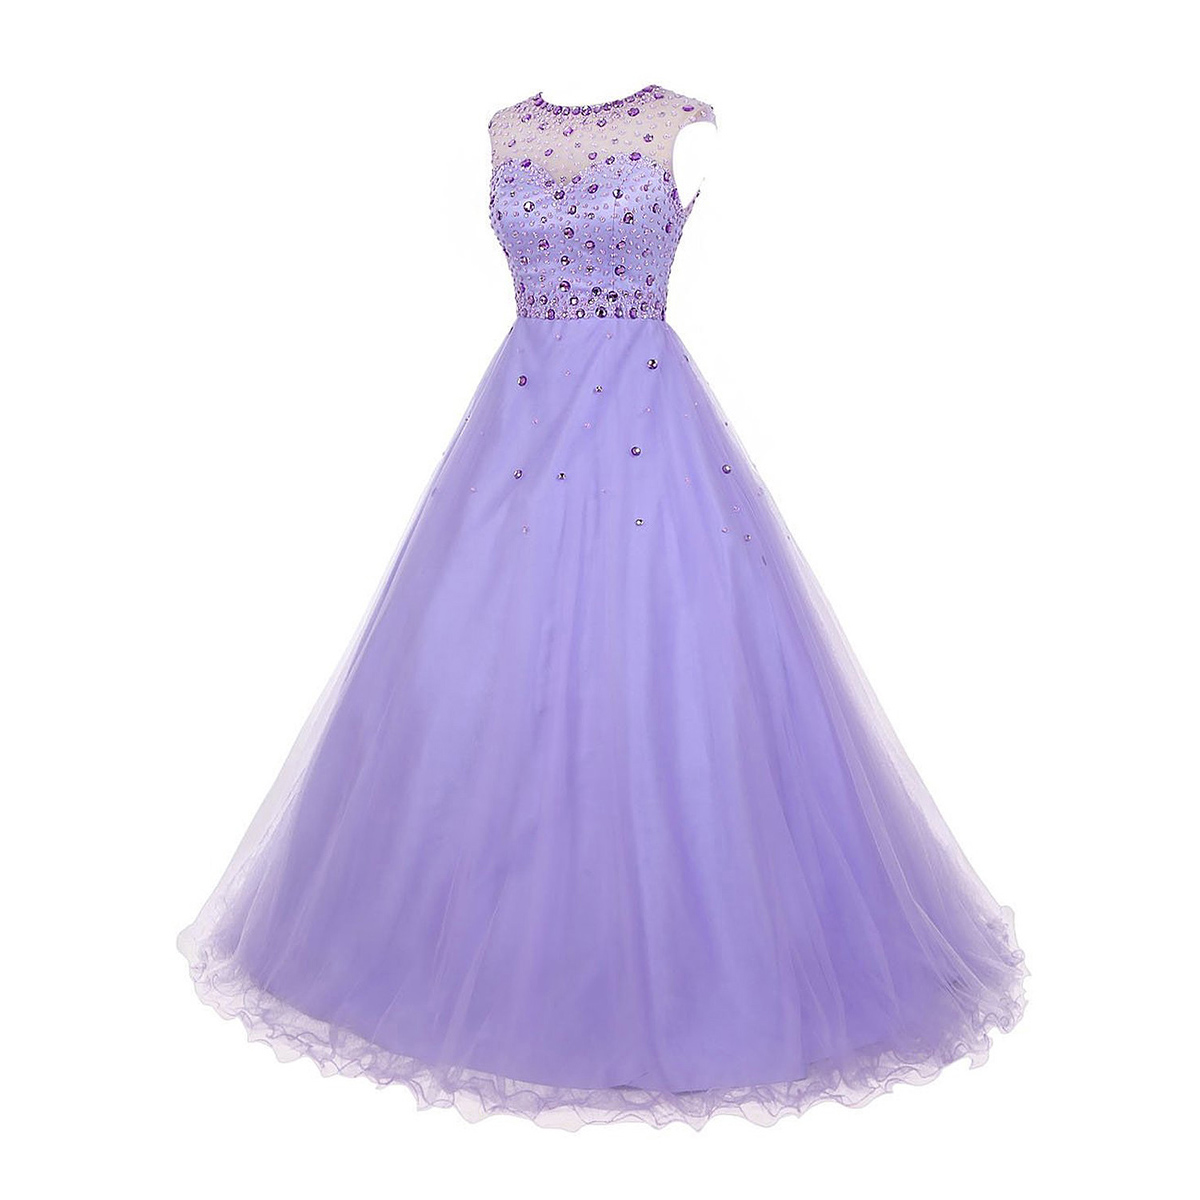 Crystal Jewel Neck Illusion Cap Sleeves Prom Dress, Beaded A-line Long ...